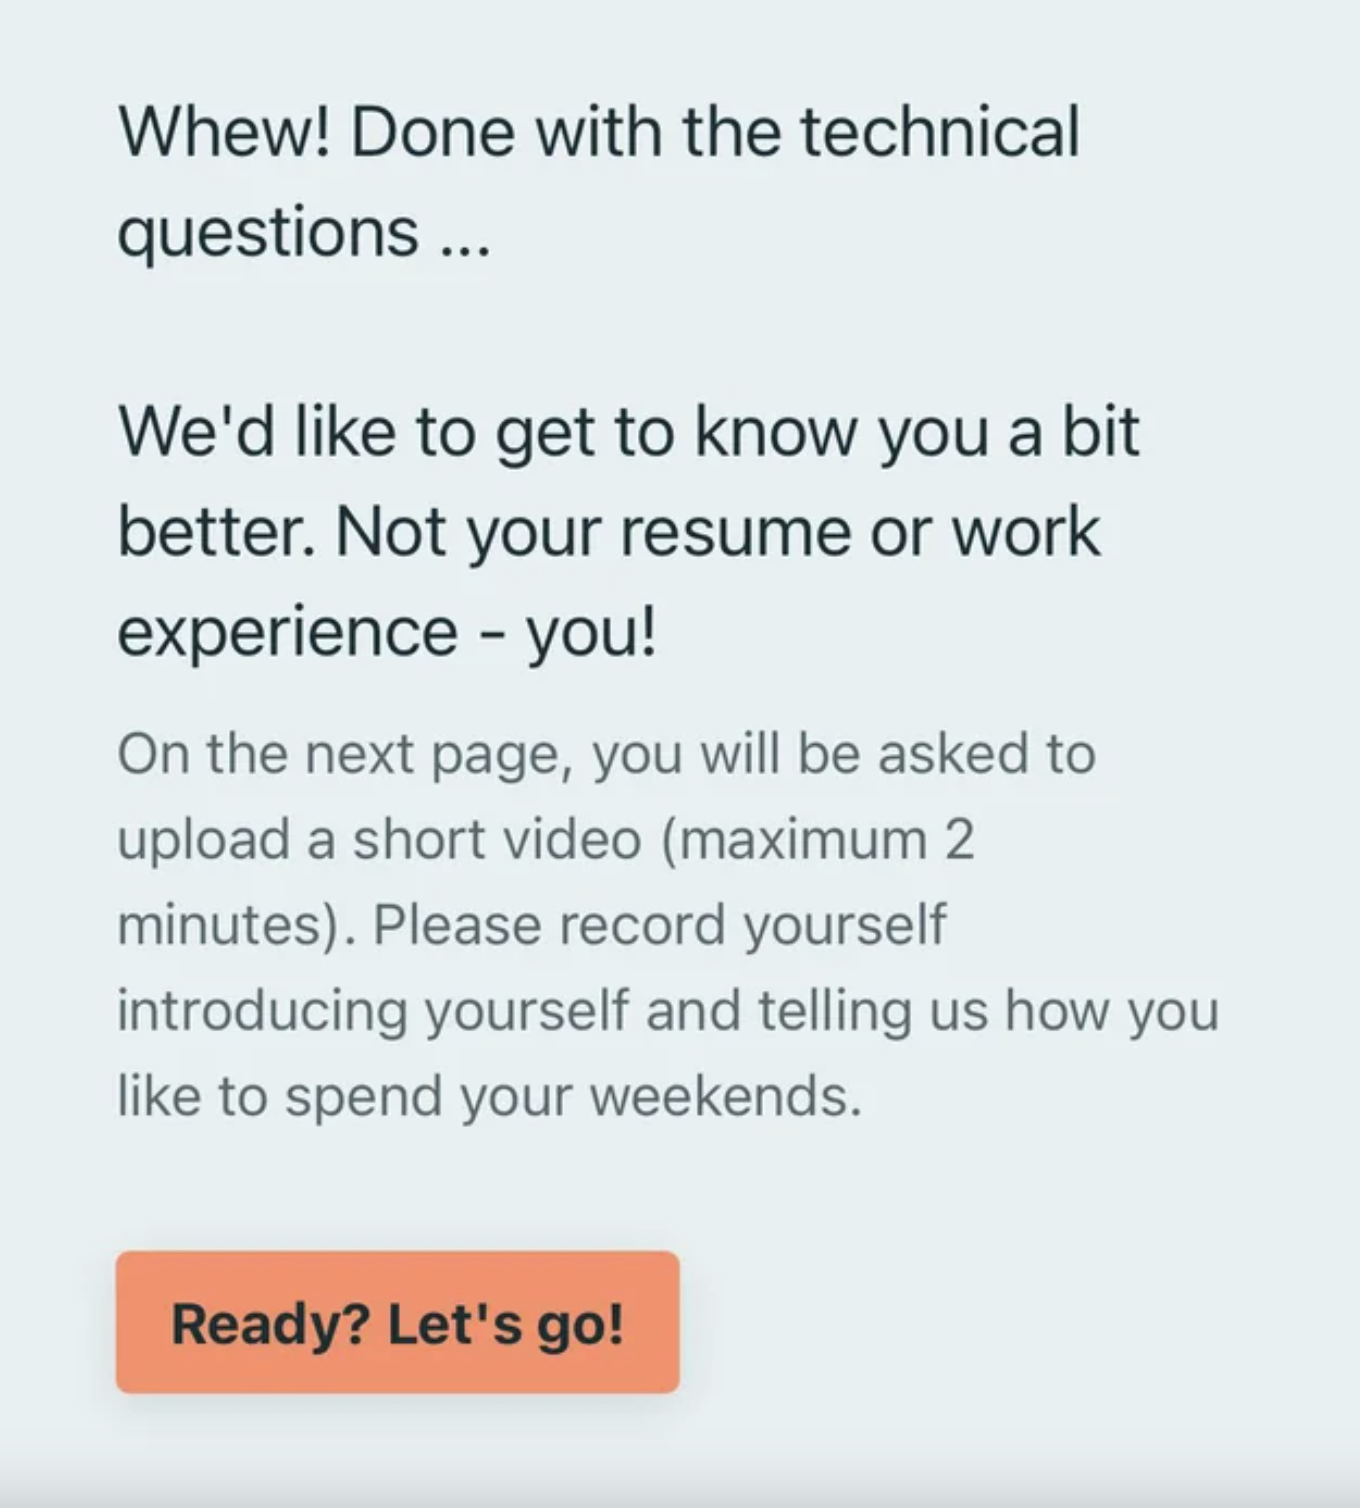 &quot;Please record yourself introducing yourself and telling us how you like to spend your weekends.&quot;